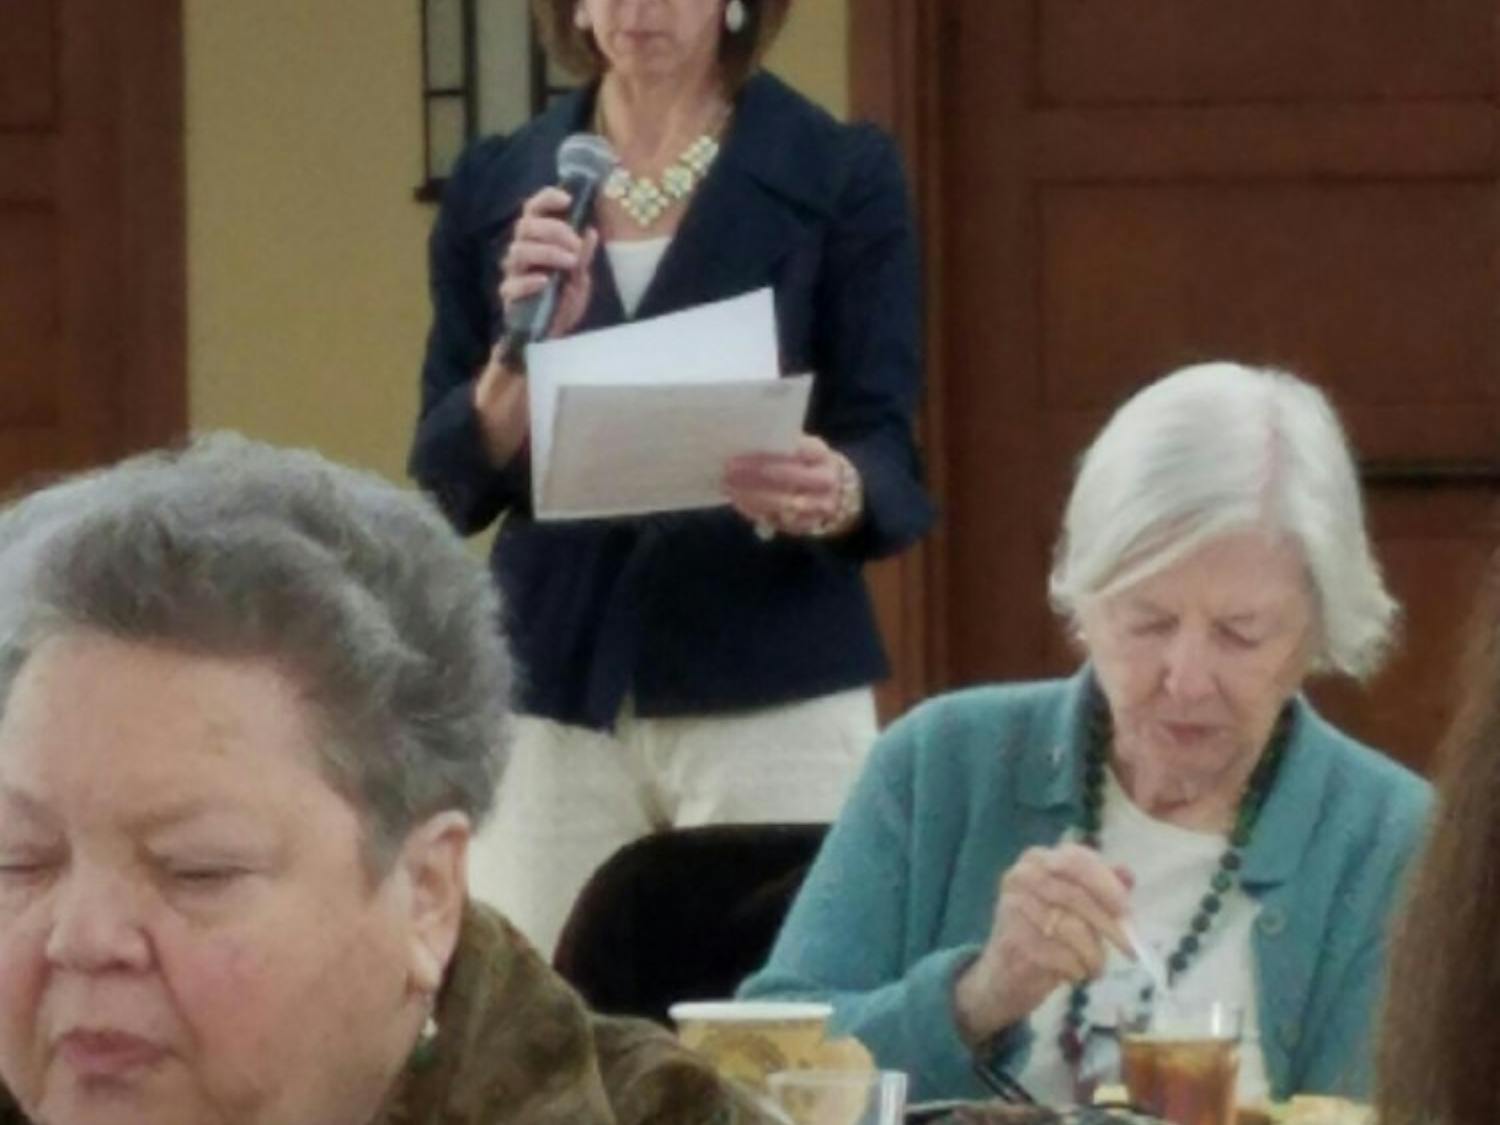 Stacey Yusko, the executive director of the Chapel Hill-Carrboro Meals on Wheels, speaks at a celebration event.